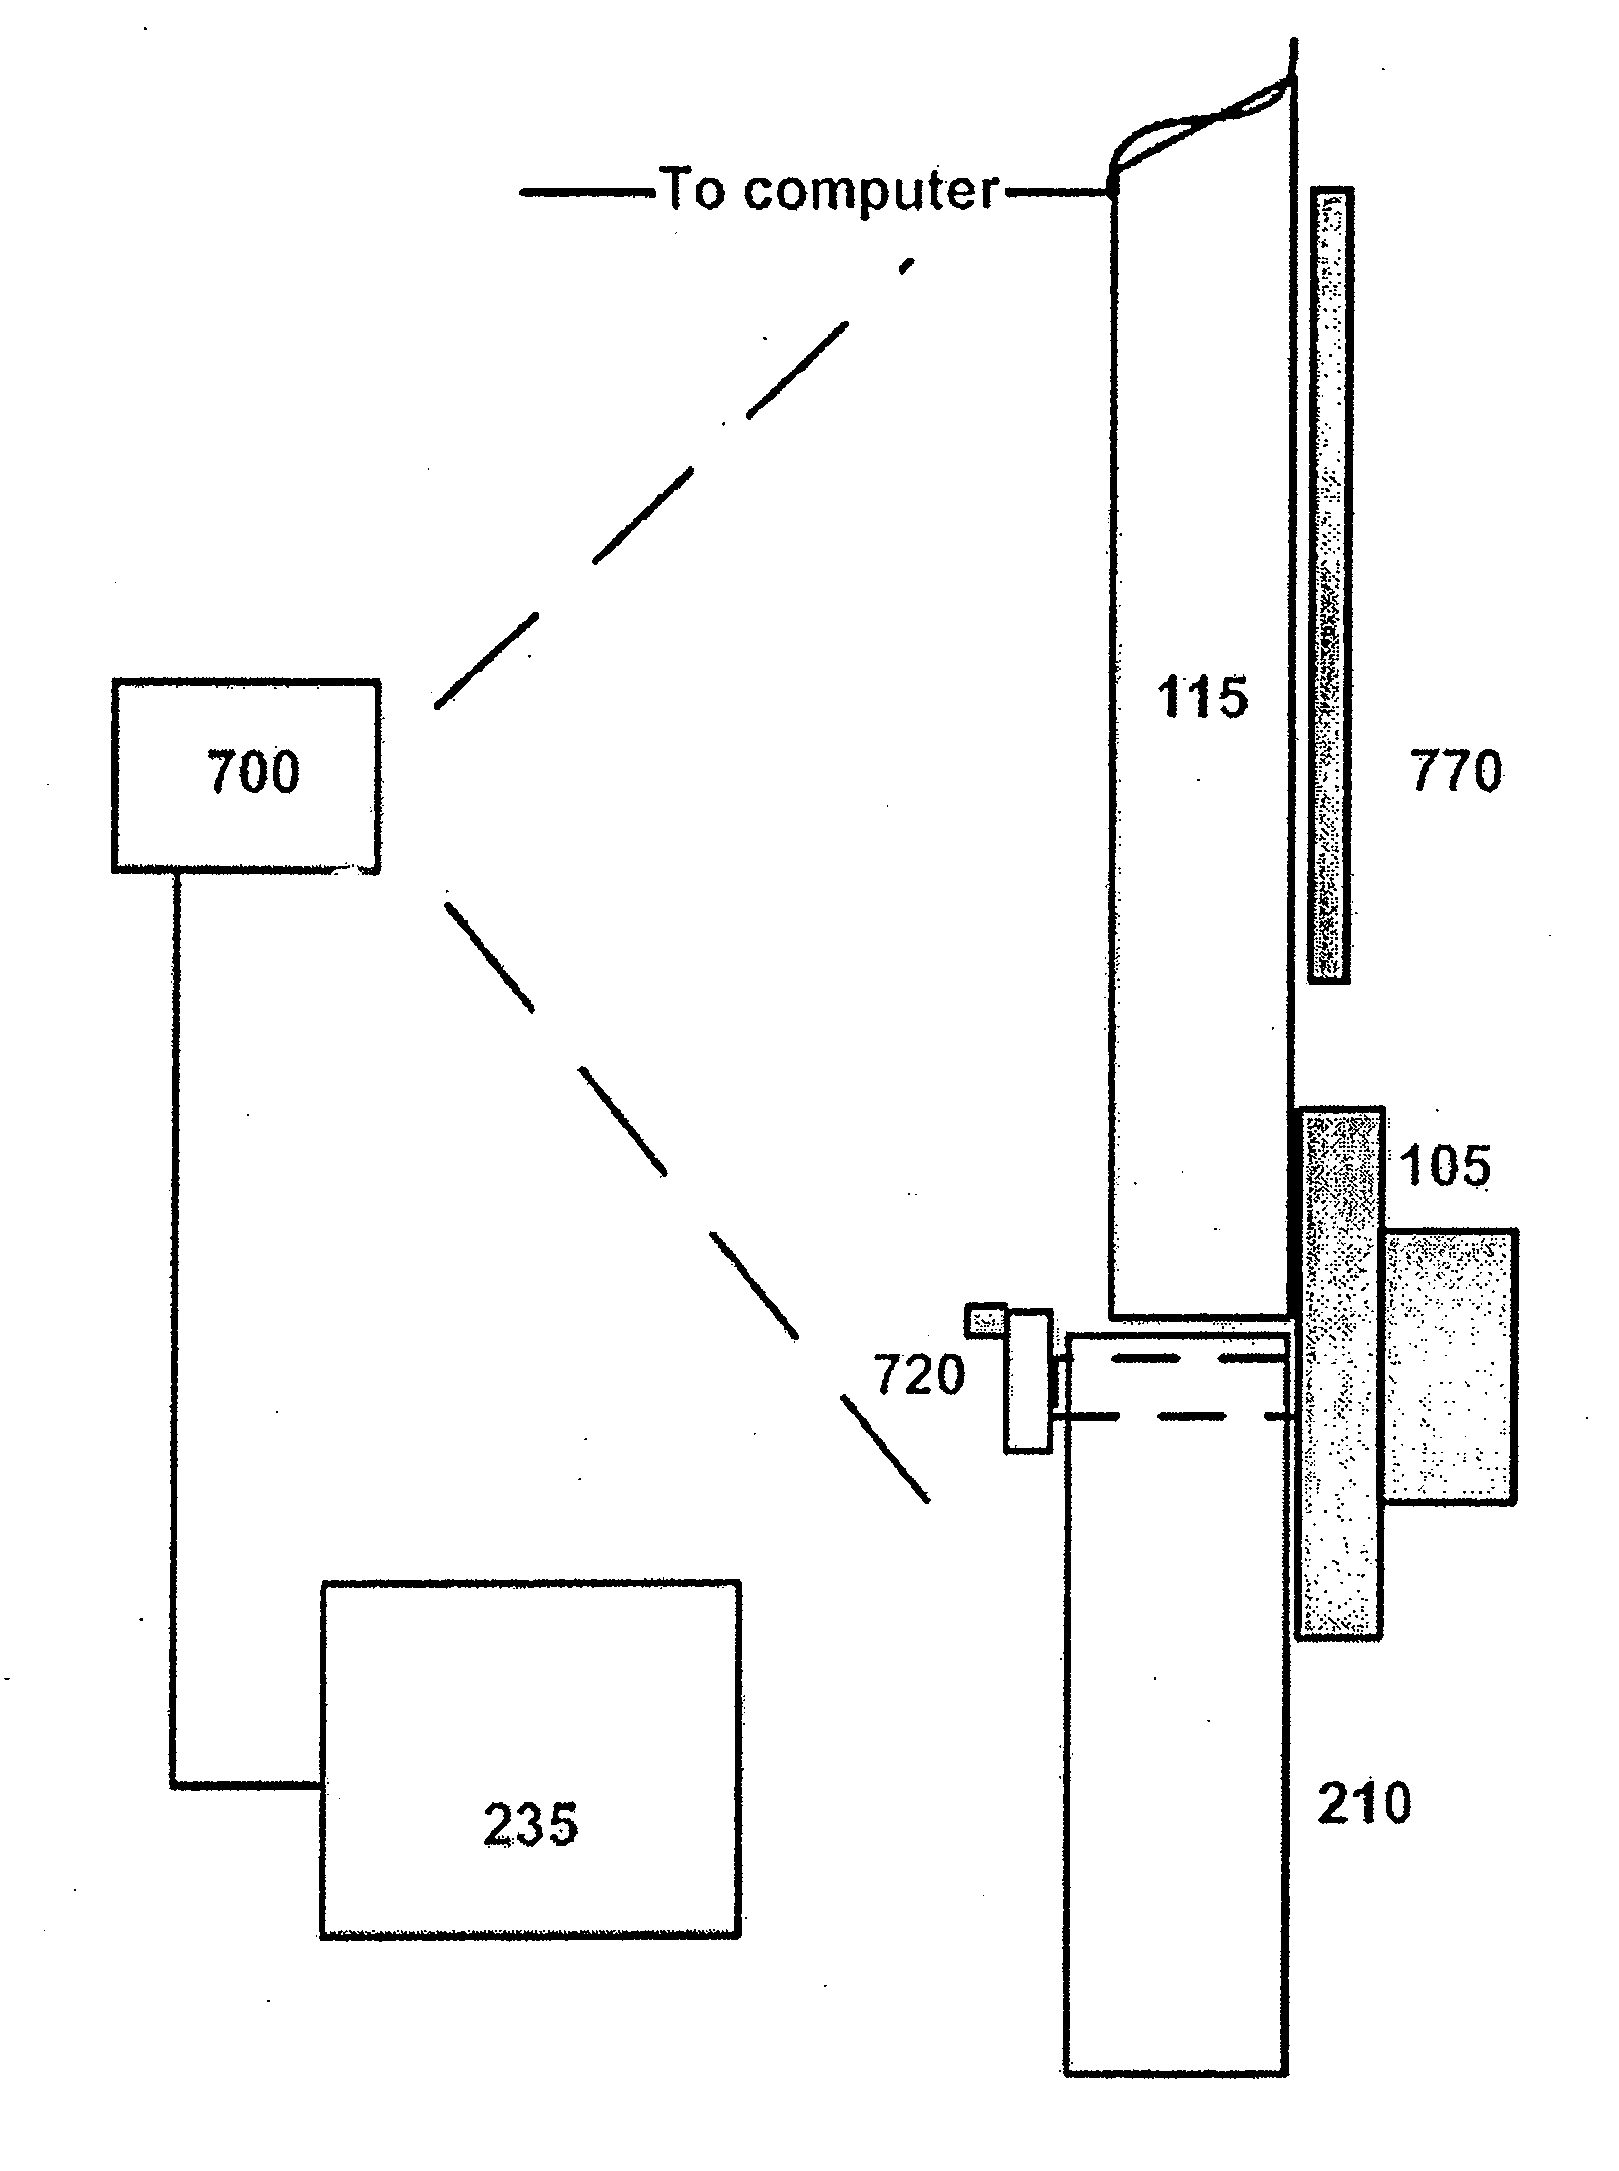 Method and apparatus employing multi-functional controls and displays